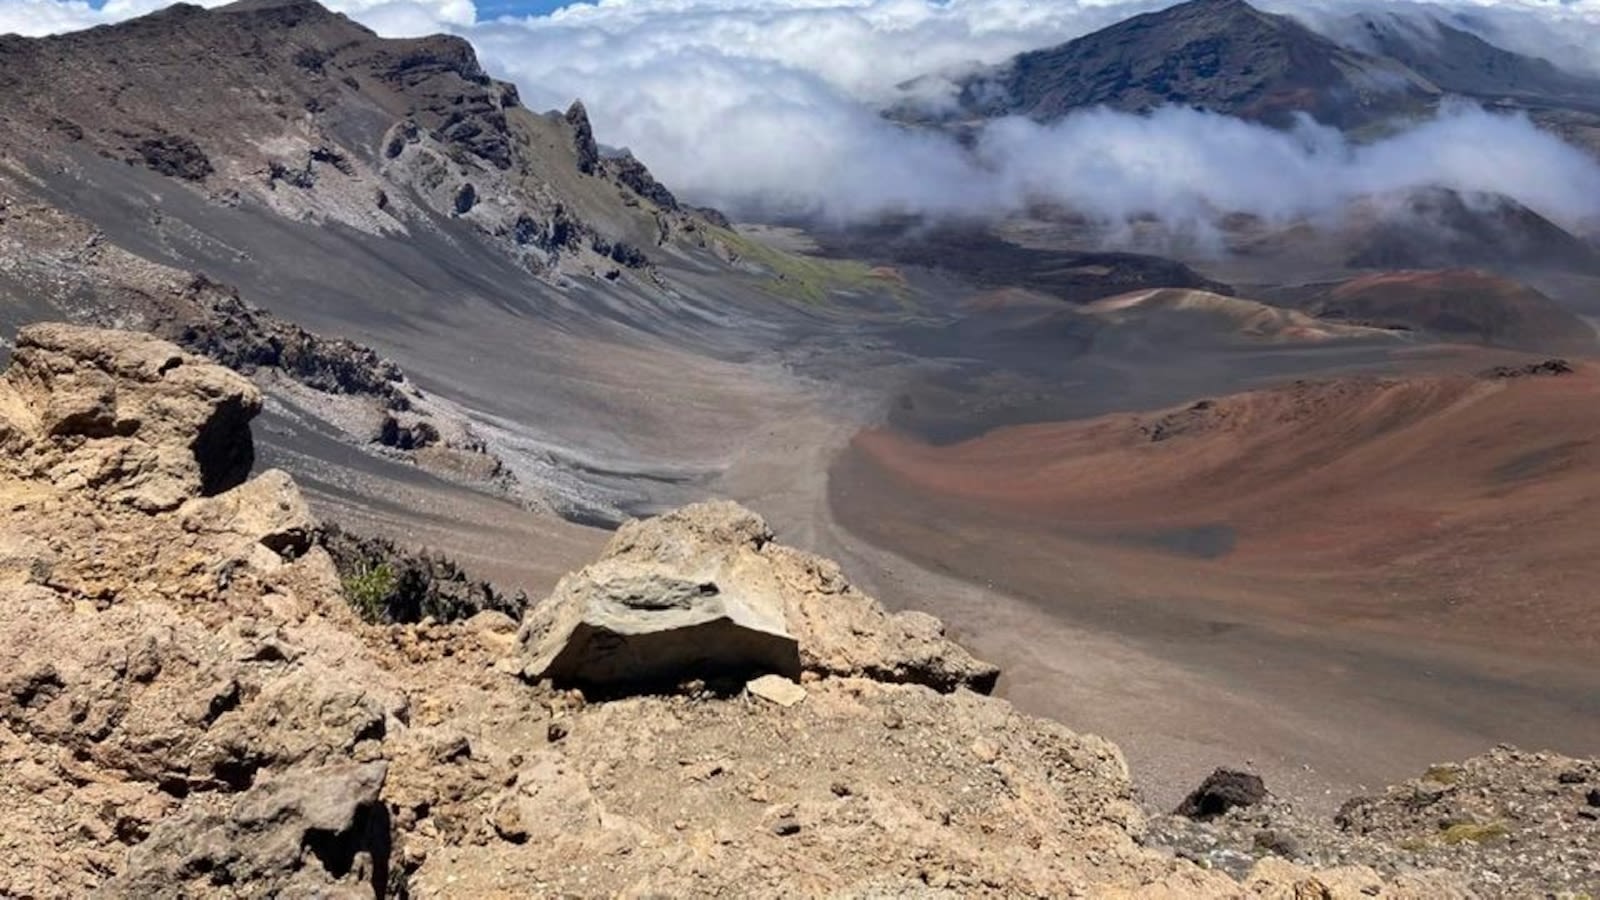 Maui council opposes US Space Force plan to build new telescopes on Haleakala volcano